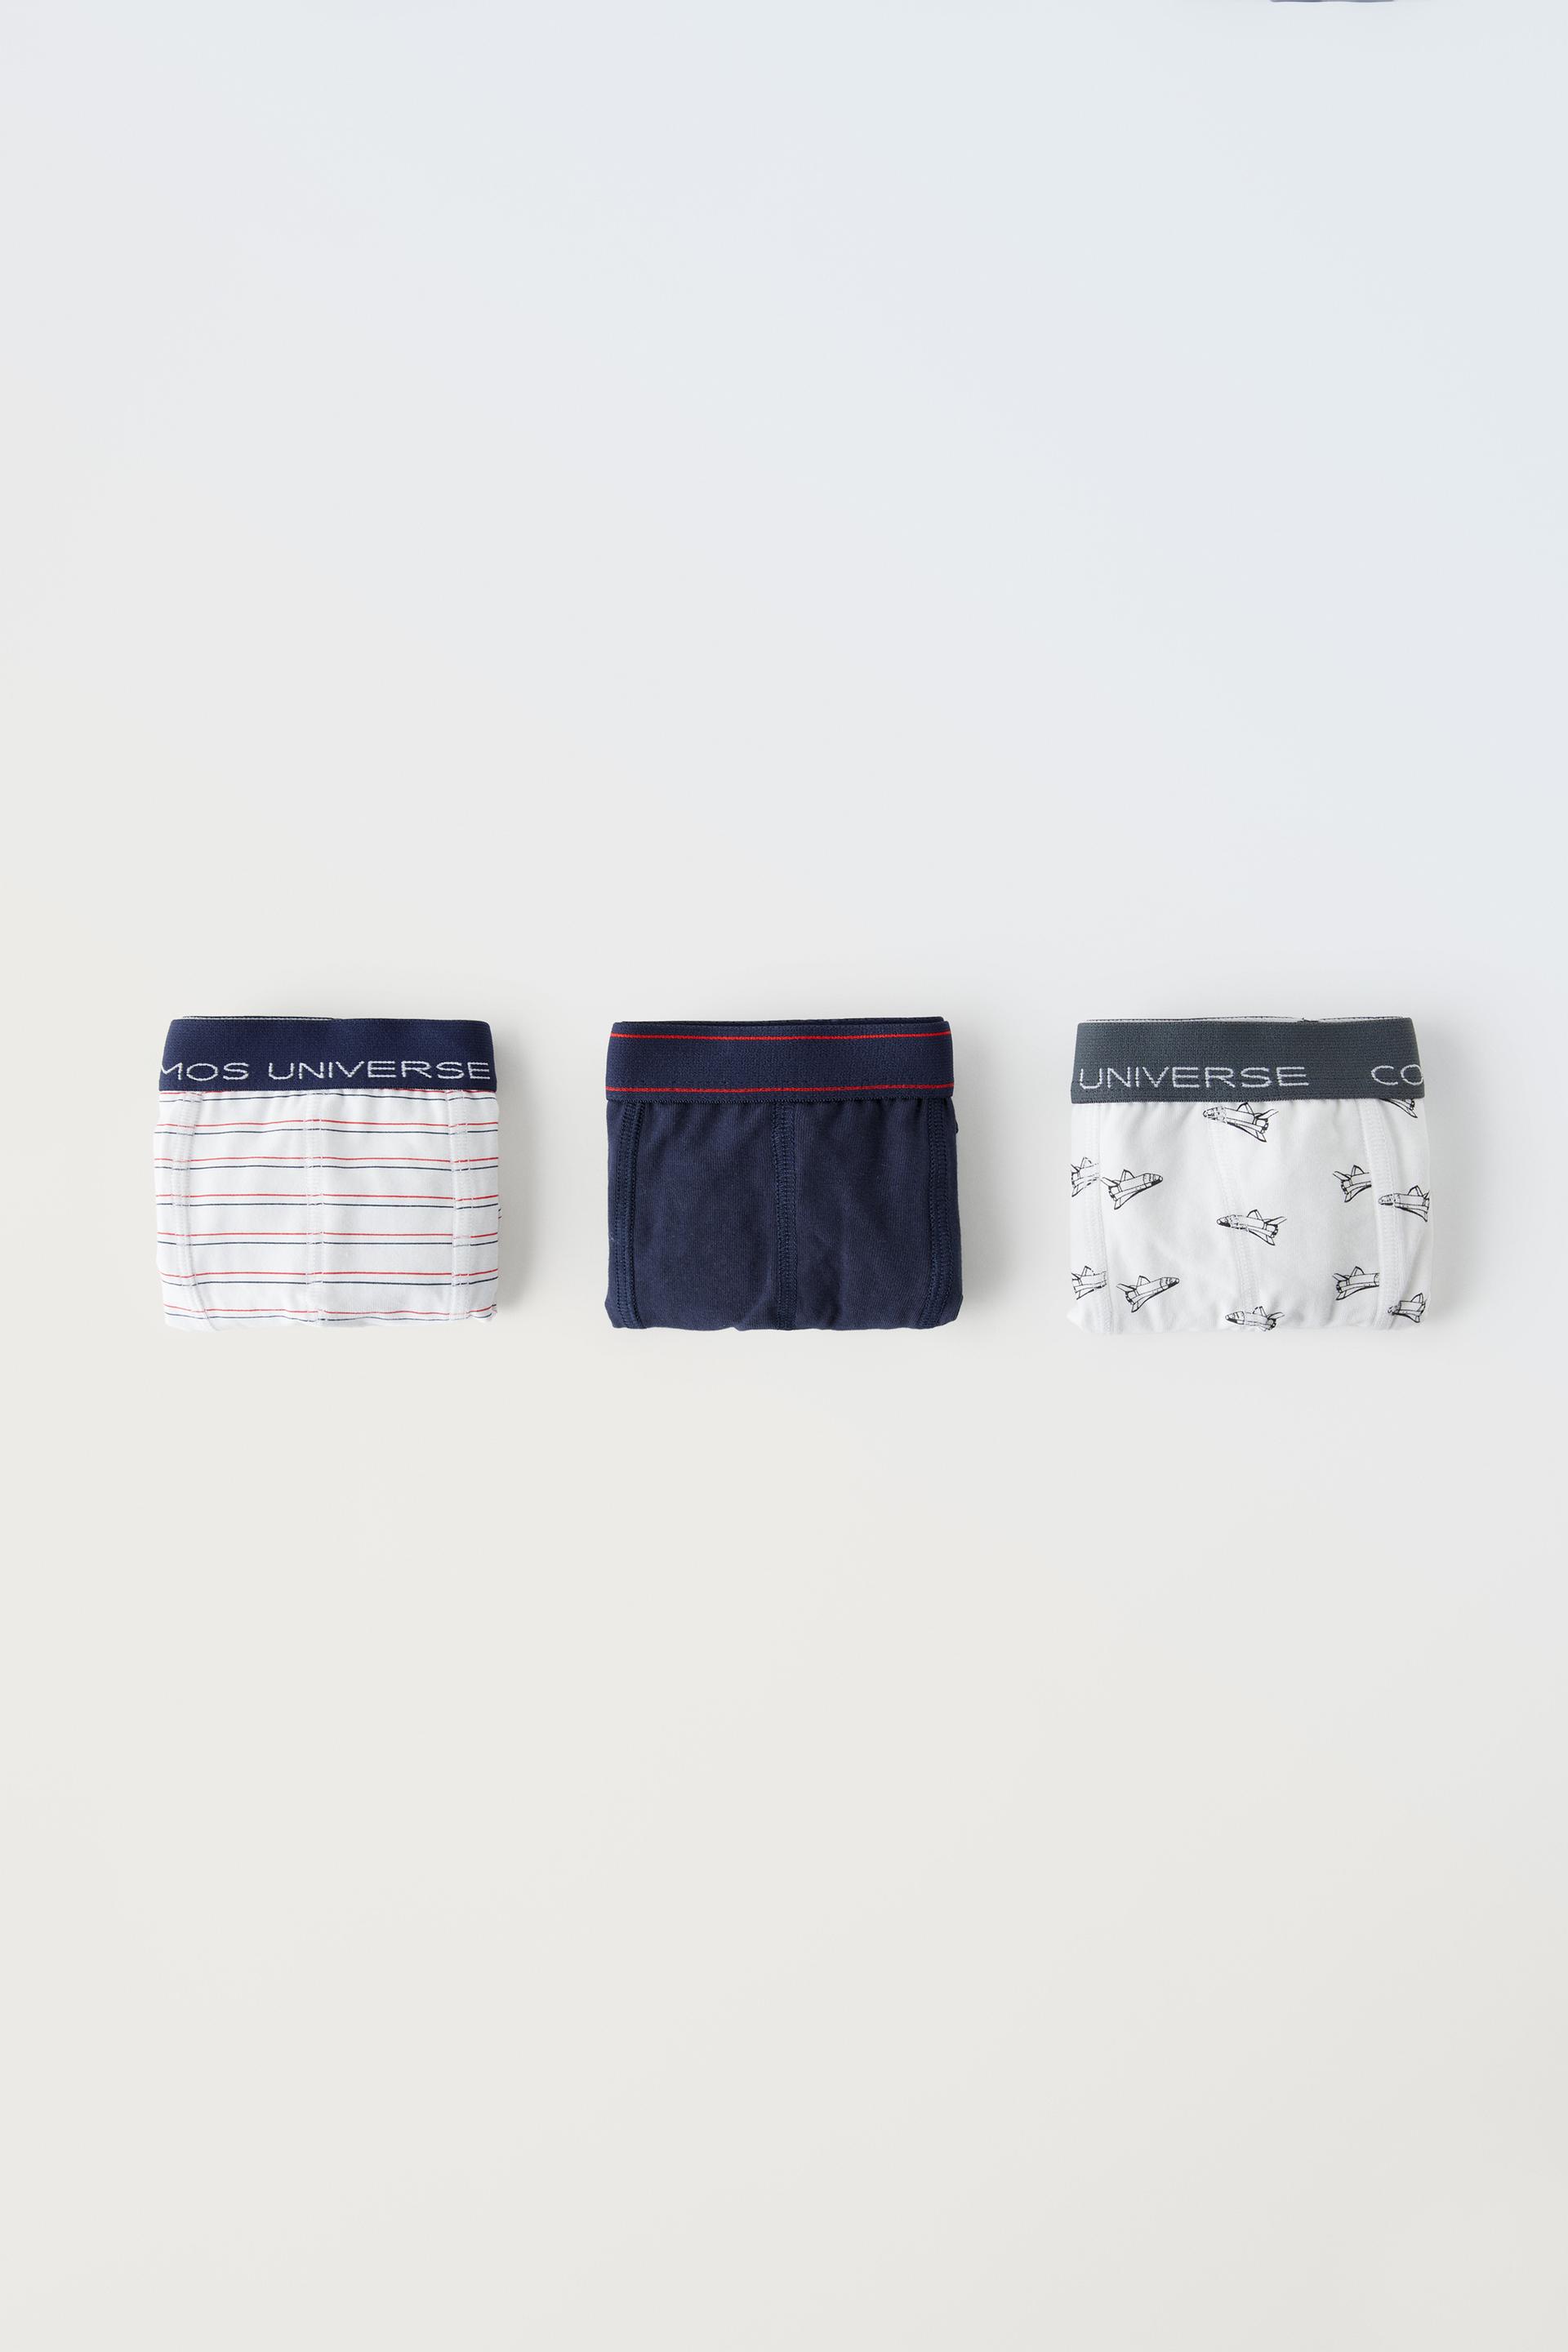 6-14 YEARS/ FIVE-PACK OF STRIPED BOXERS - Light blue